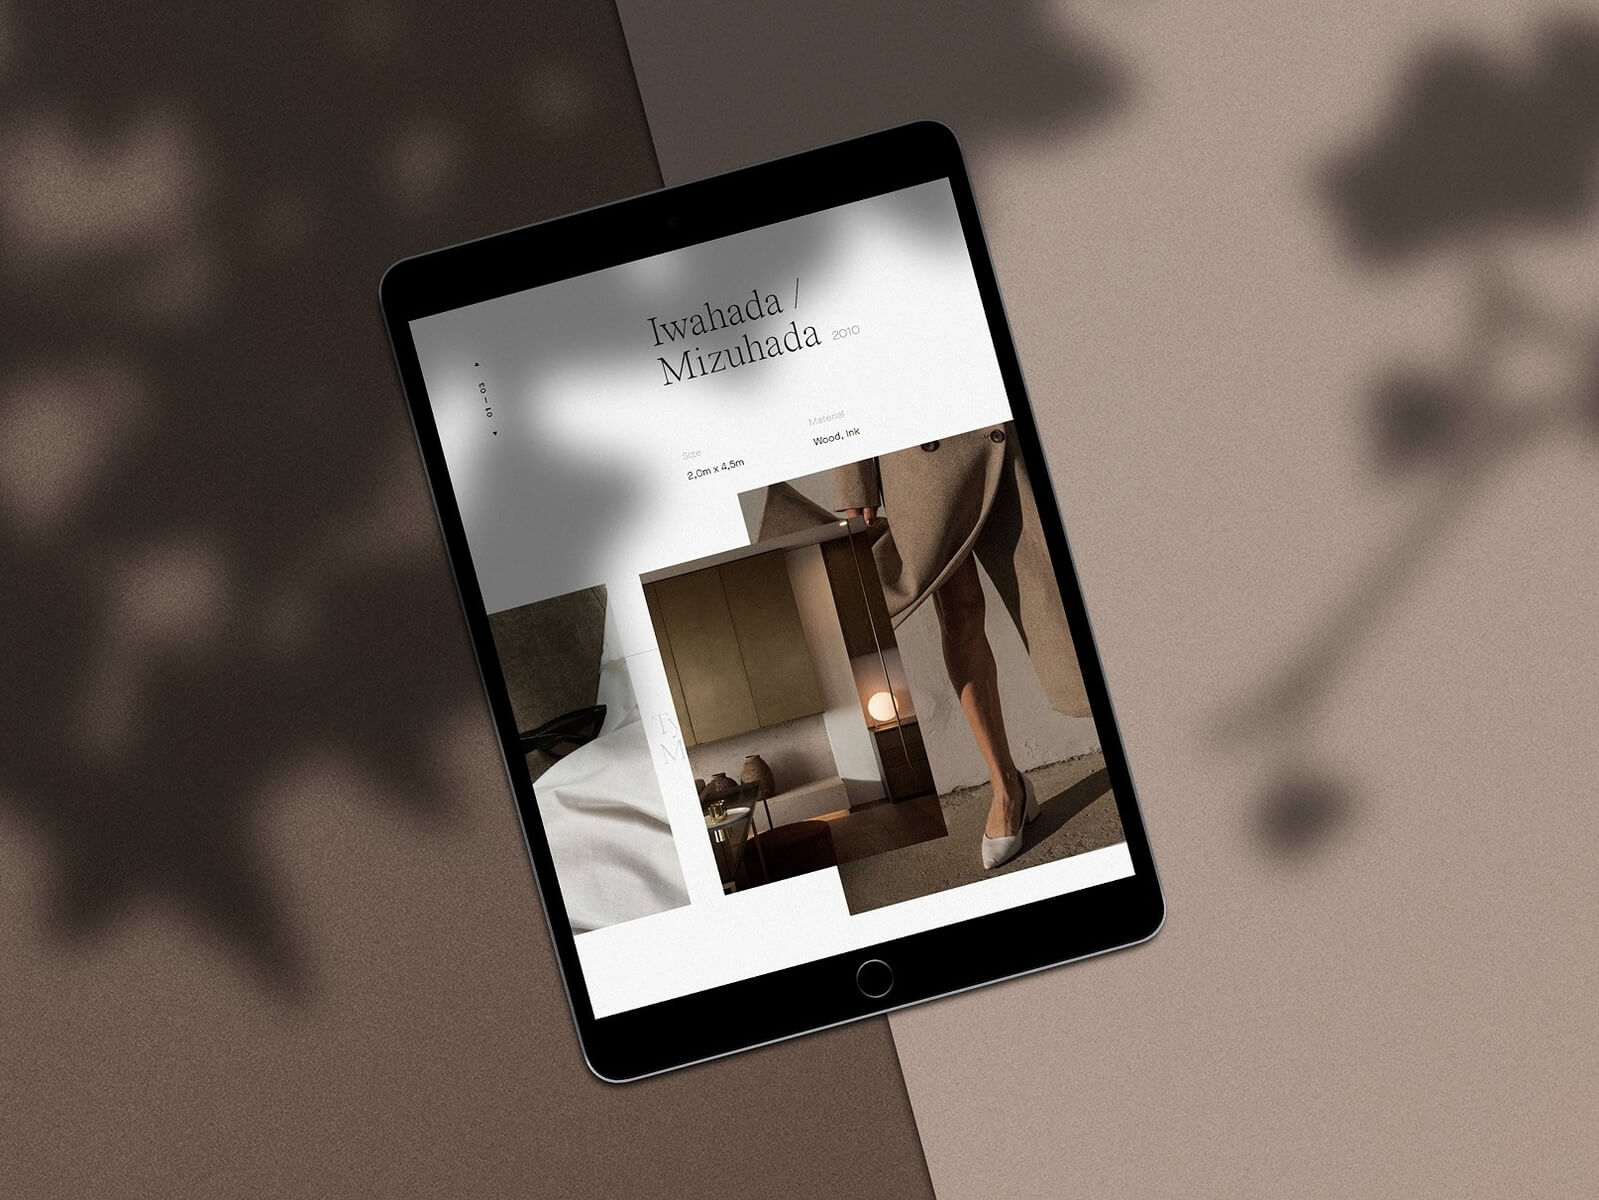 Download 20 Best Free iPad Mockups and Templates PSD+Sketch in 2019